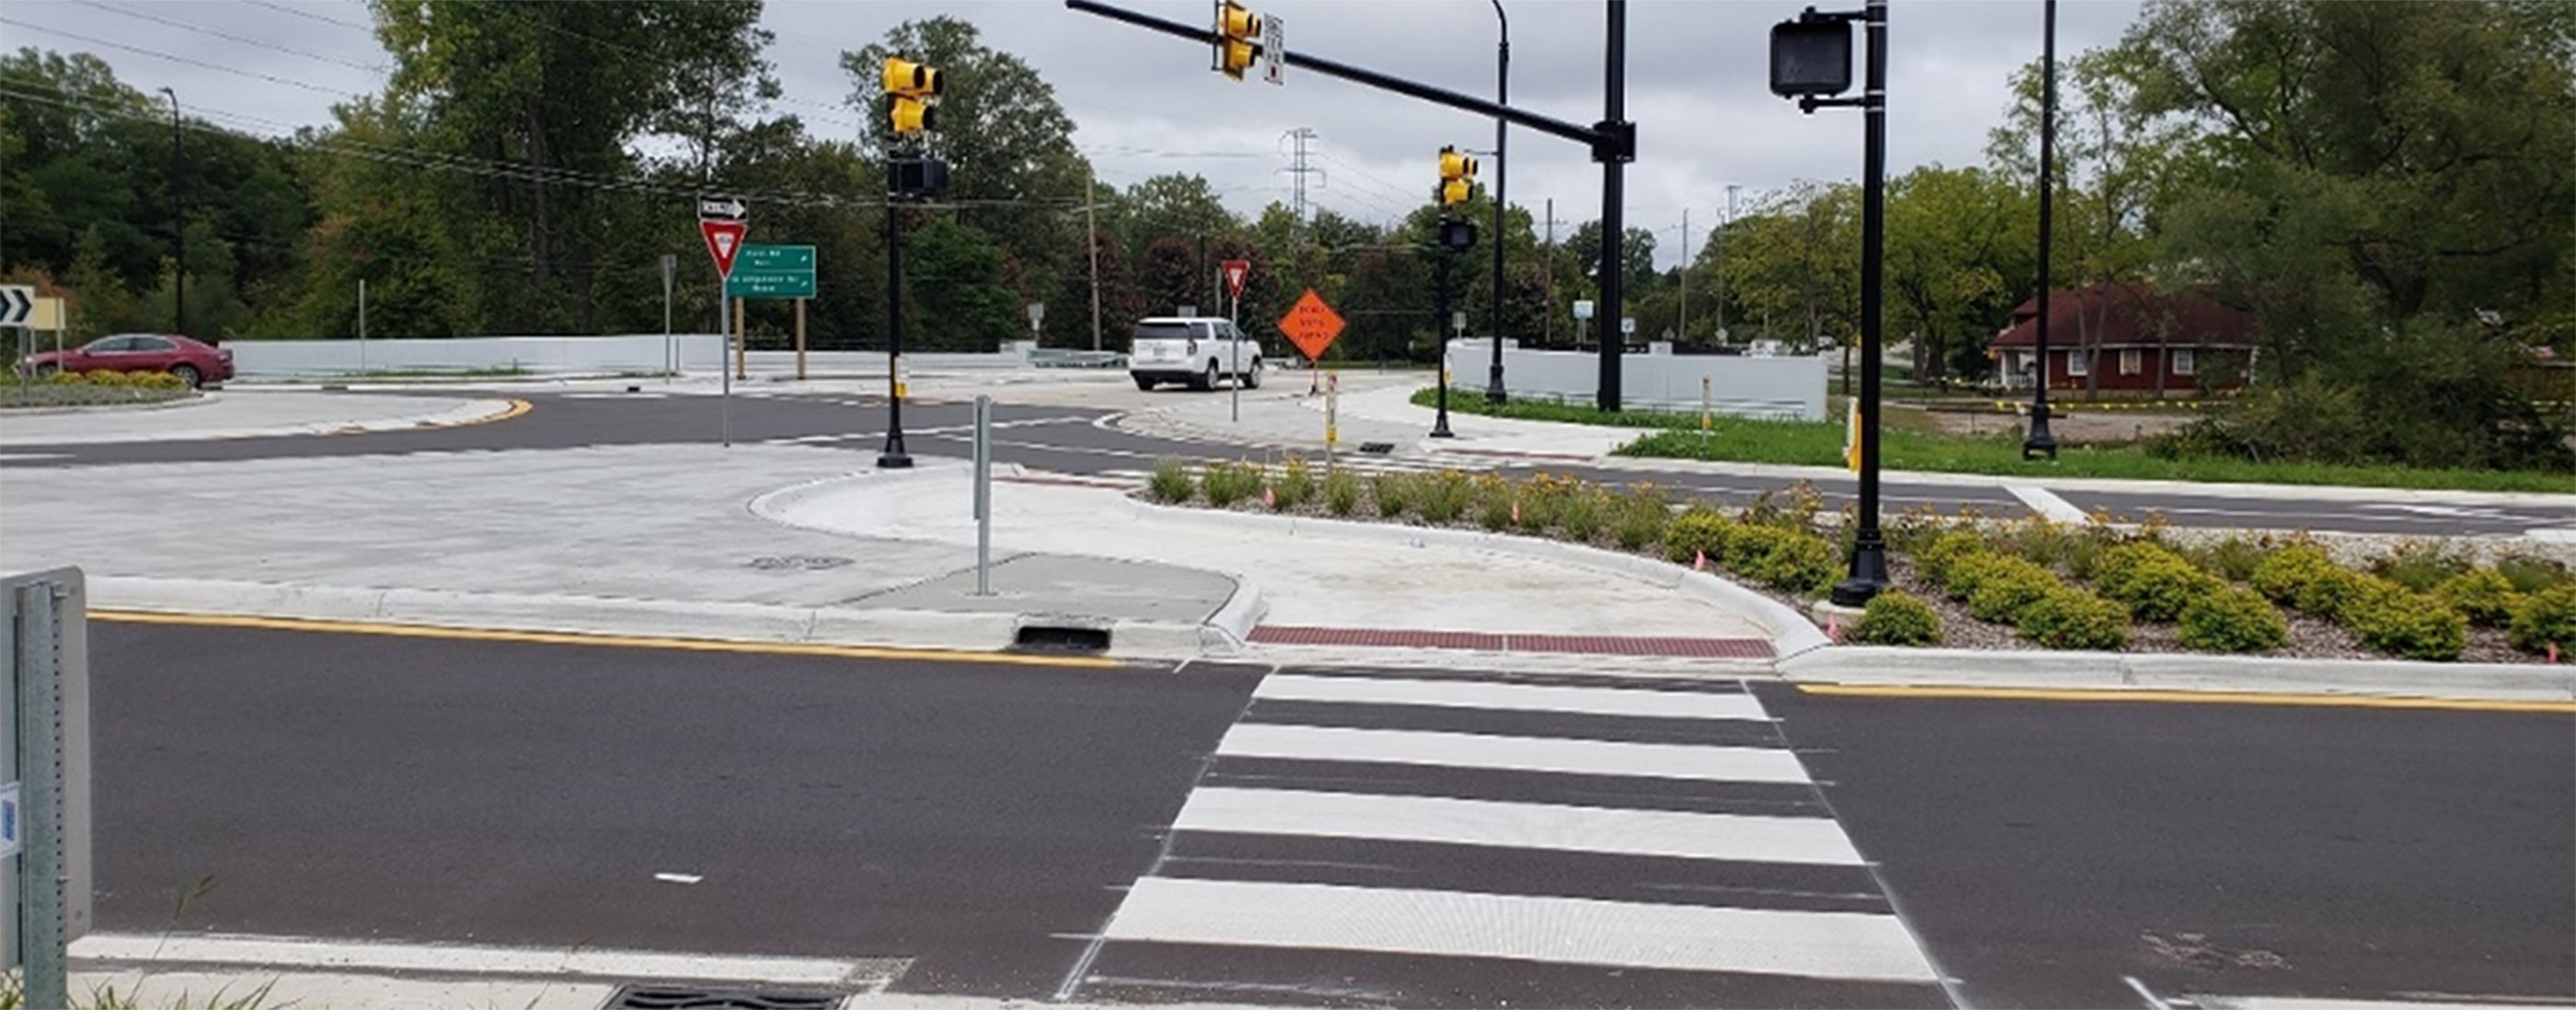 Crosswalk and traffic signaling at the roundabout 